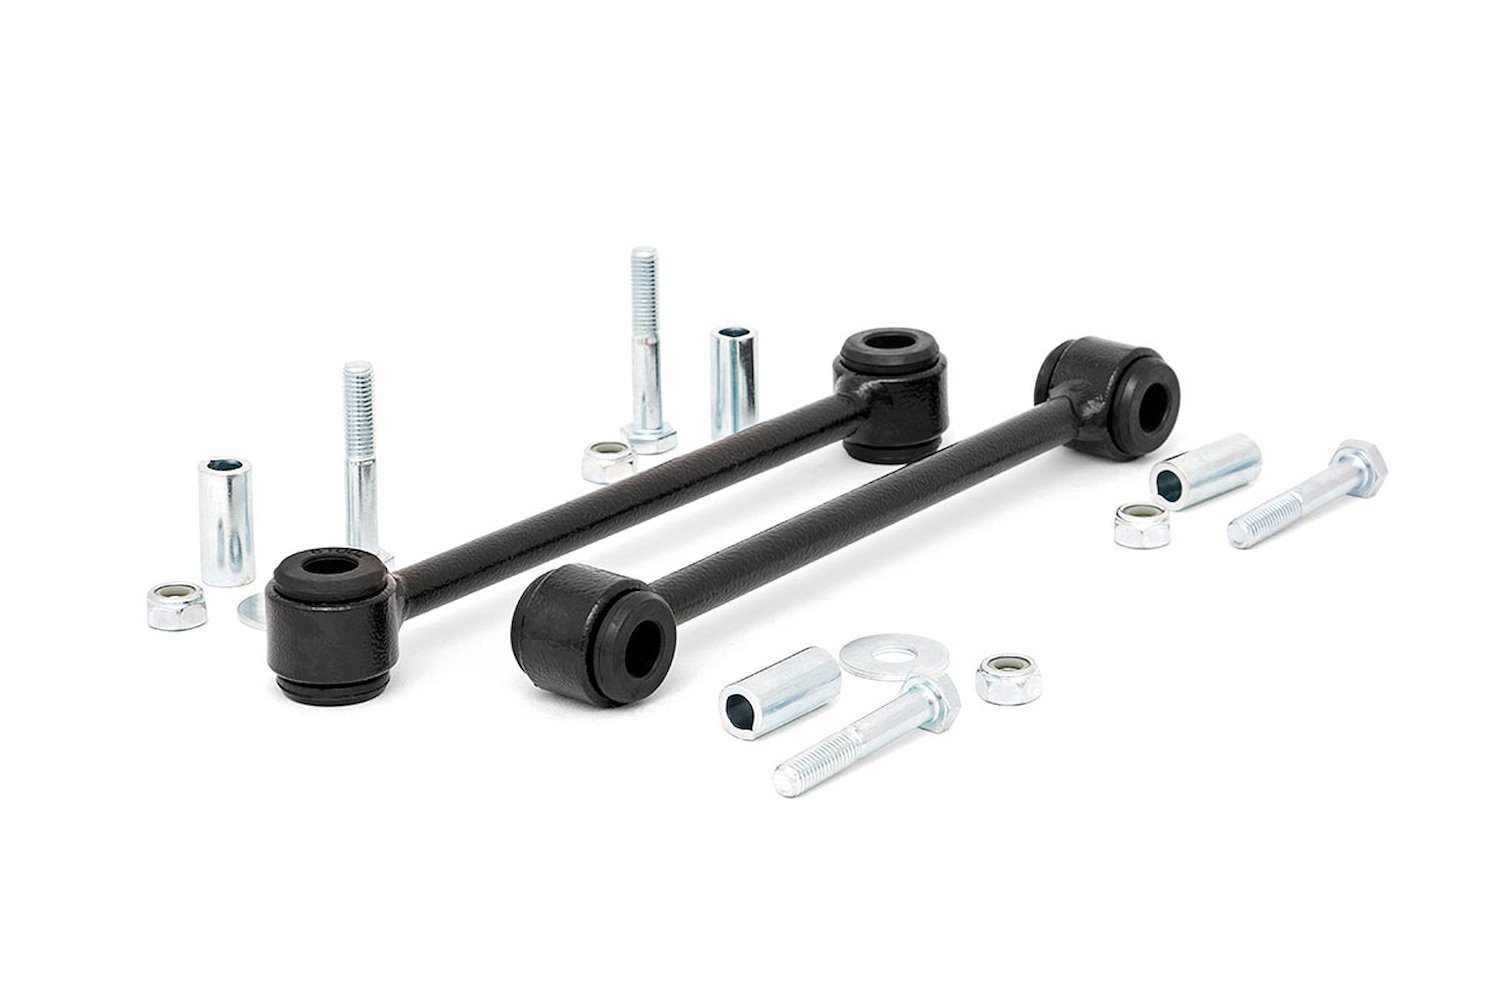 1015 Jeep Rear Sway-Bar Links for 4-6 Inch Lifts